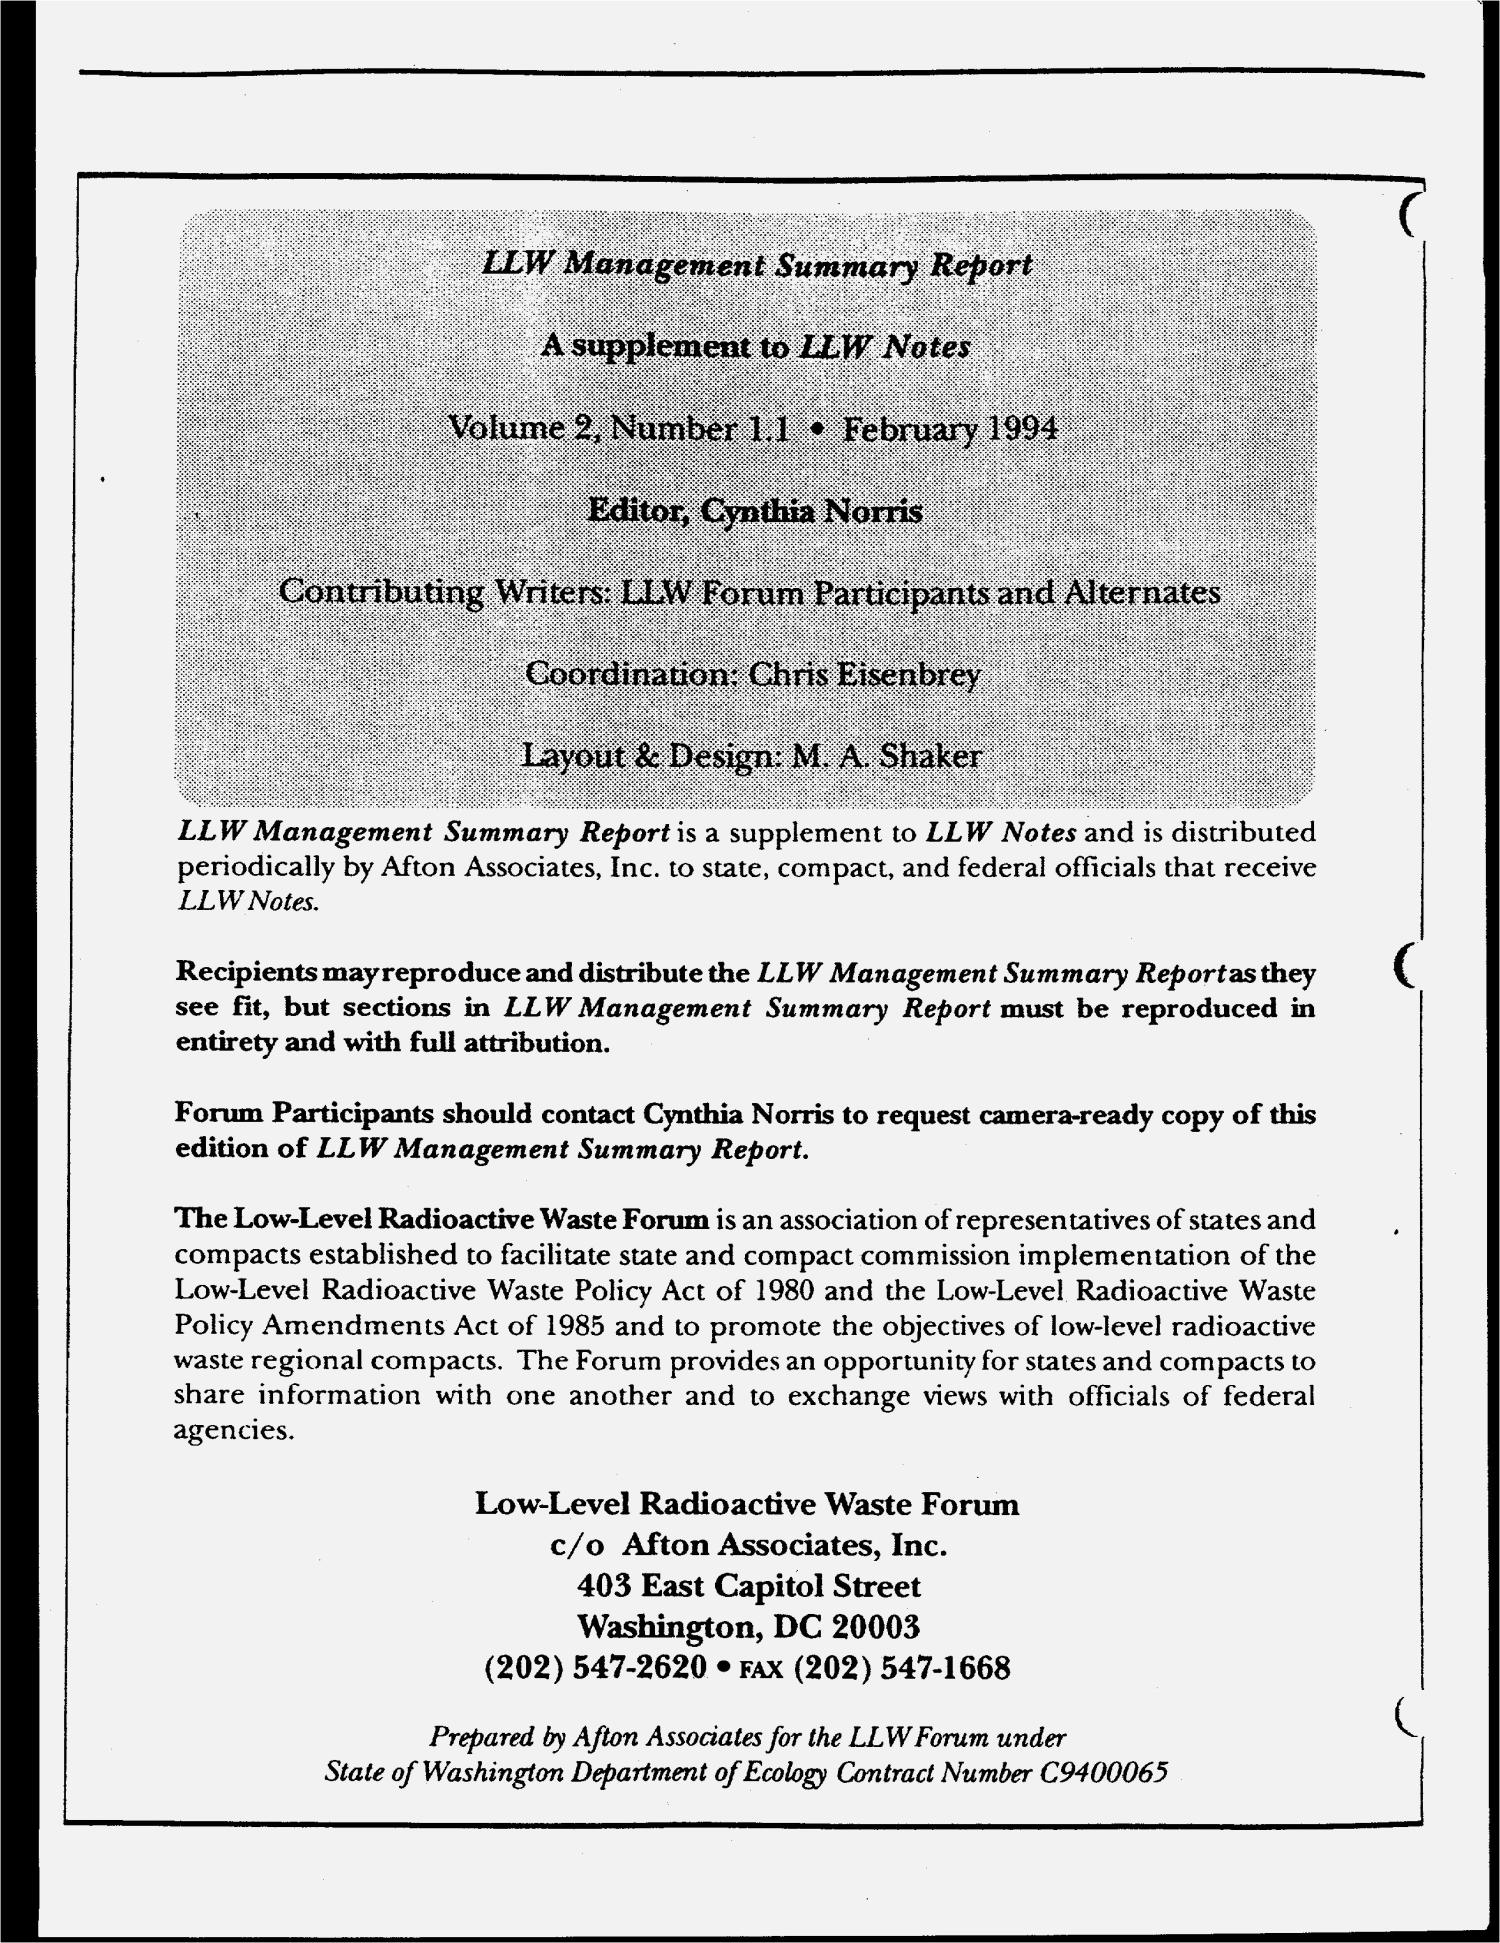 LLW Forum summary report: Volume 2, Number 1.1, February 1994: Low-level radioactive waste management activities in the states and compacts
                                                
                                                    [Sequence #]: 4 of 24
                                                